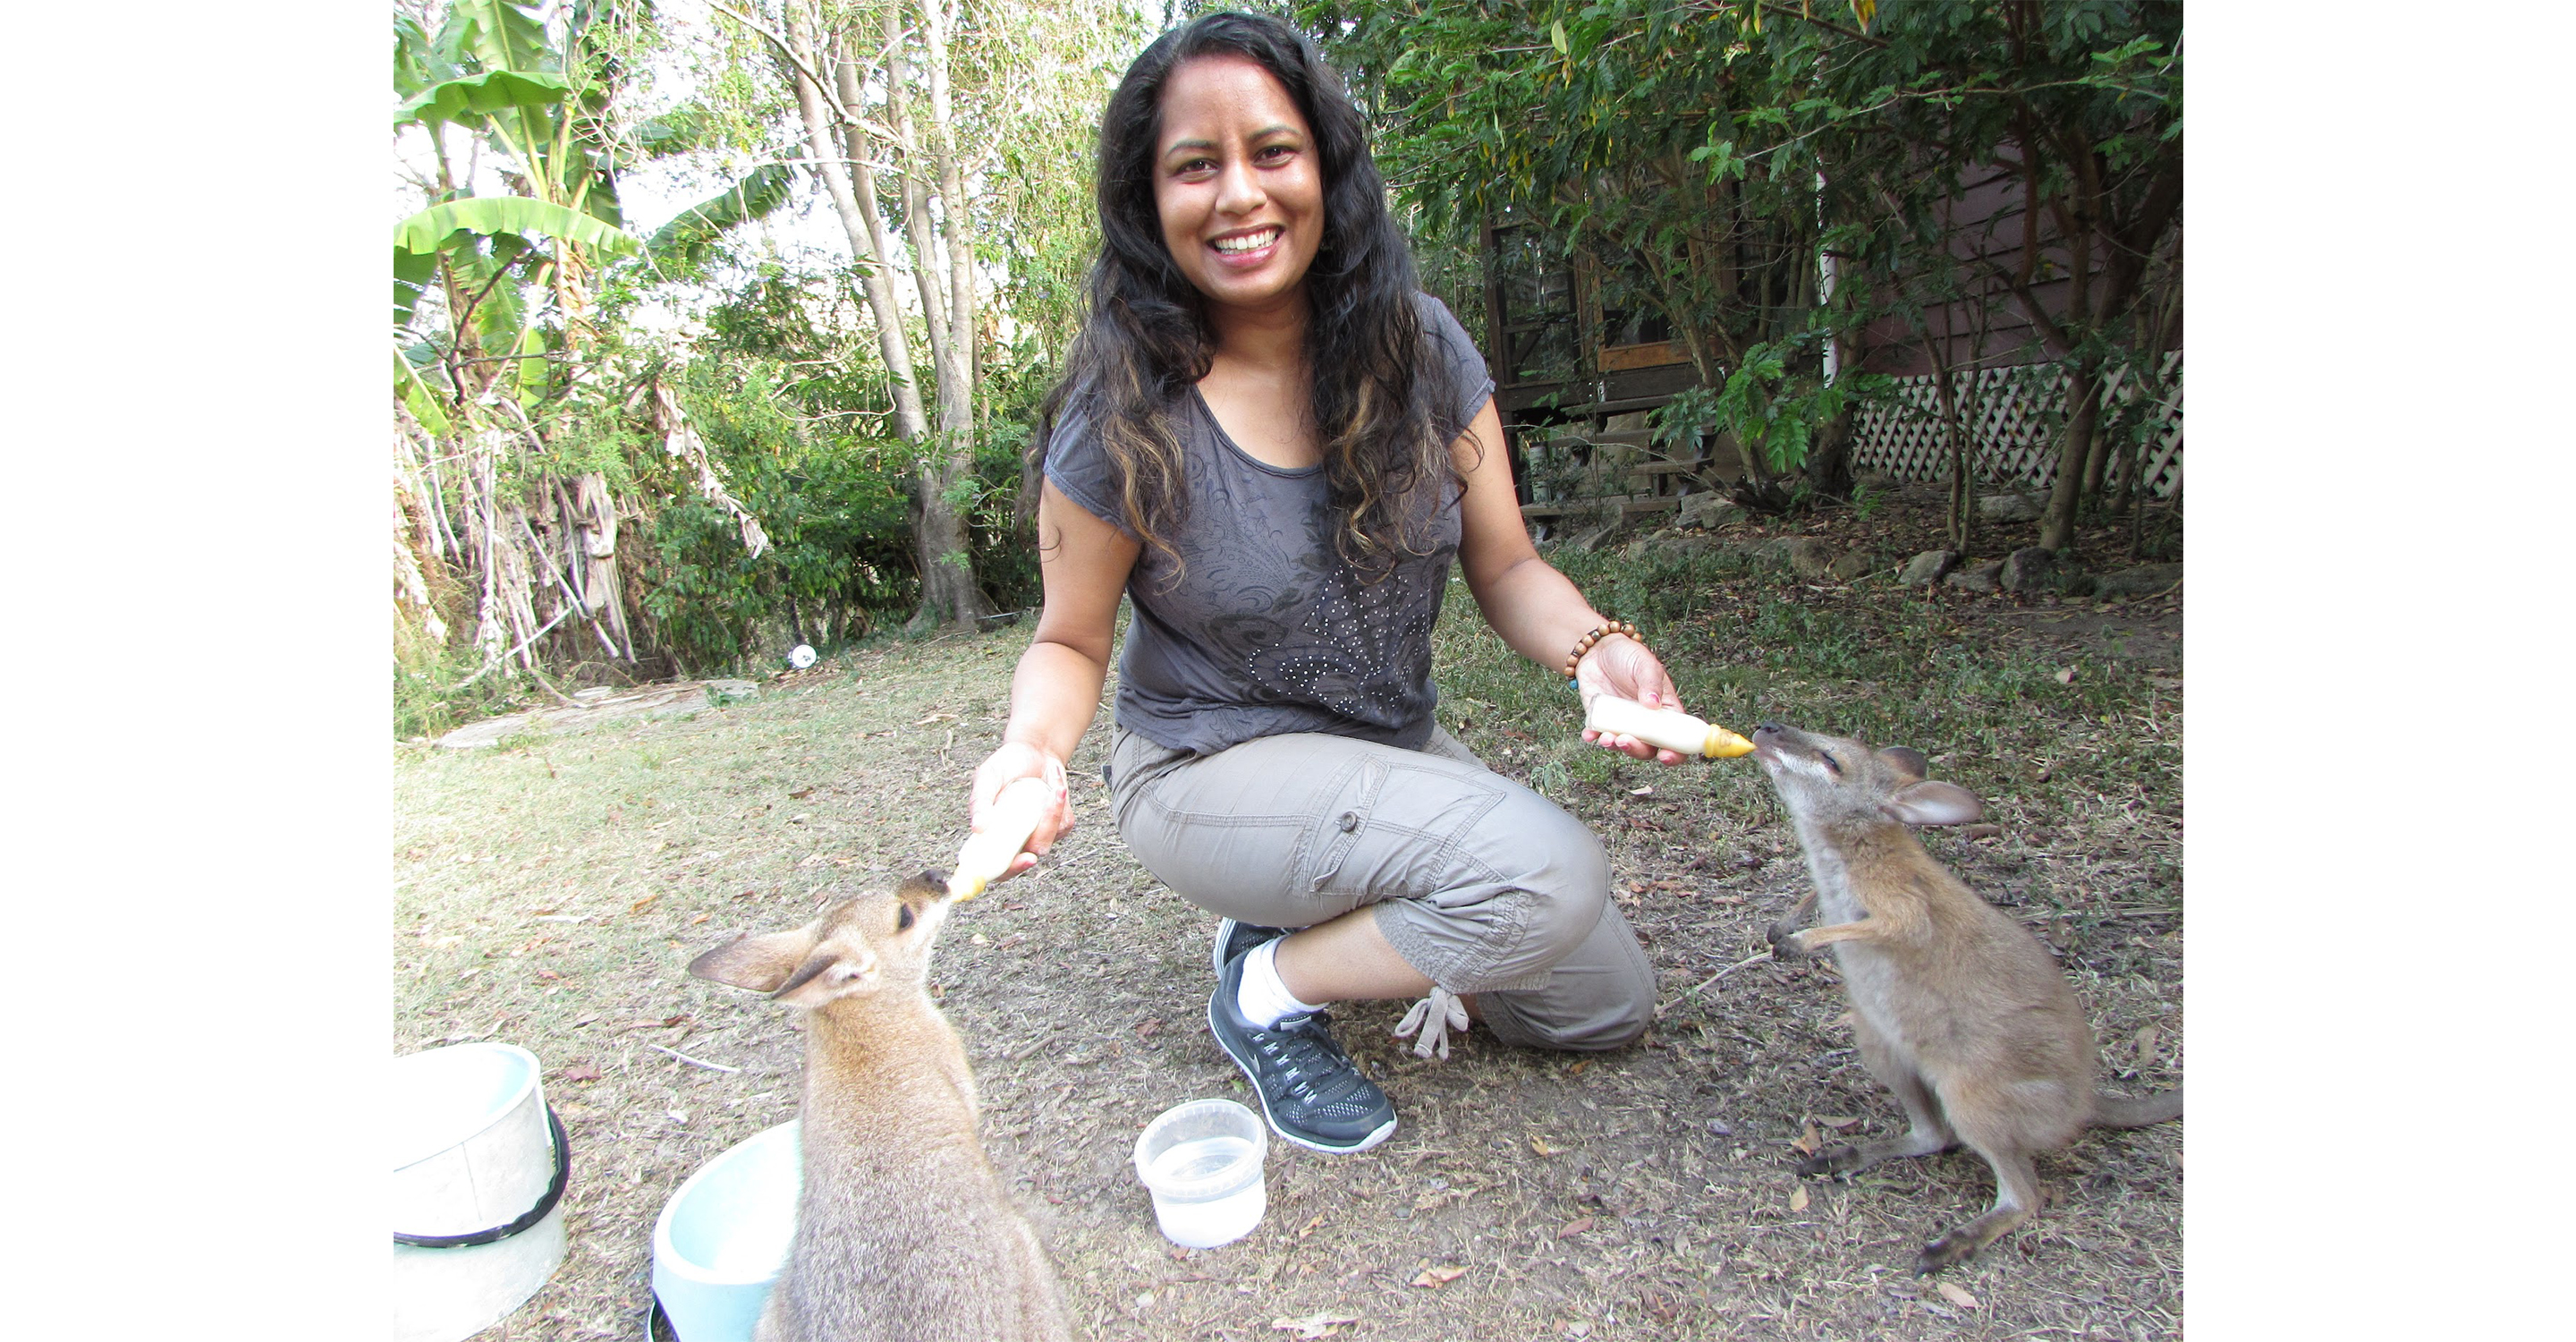 Feeding wallaby joeys at Oakview Wildlife Reserve in Queensland, Australia, 2014.